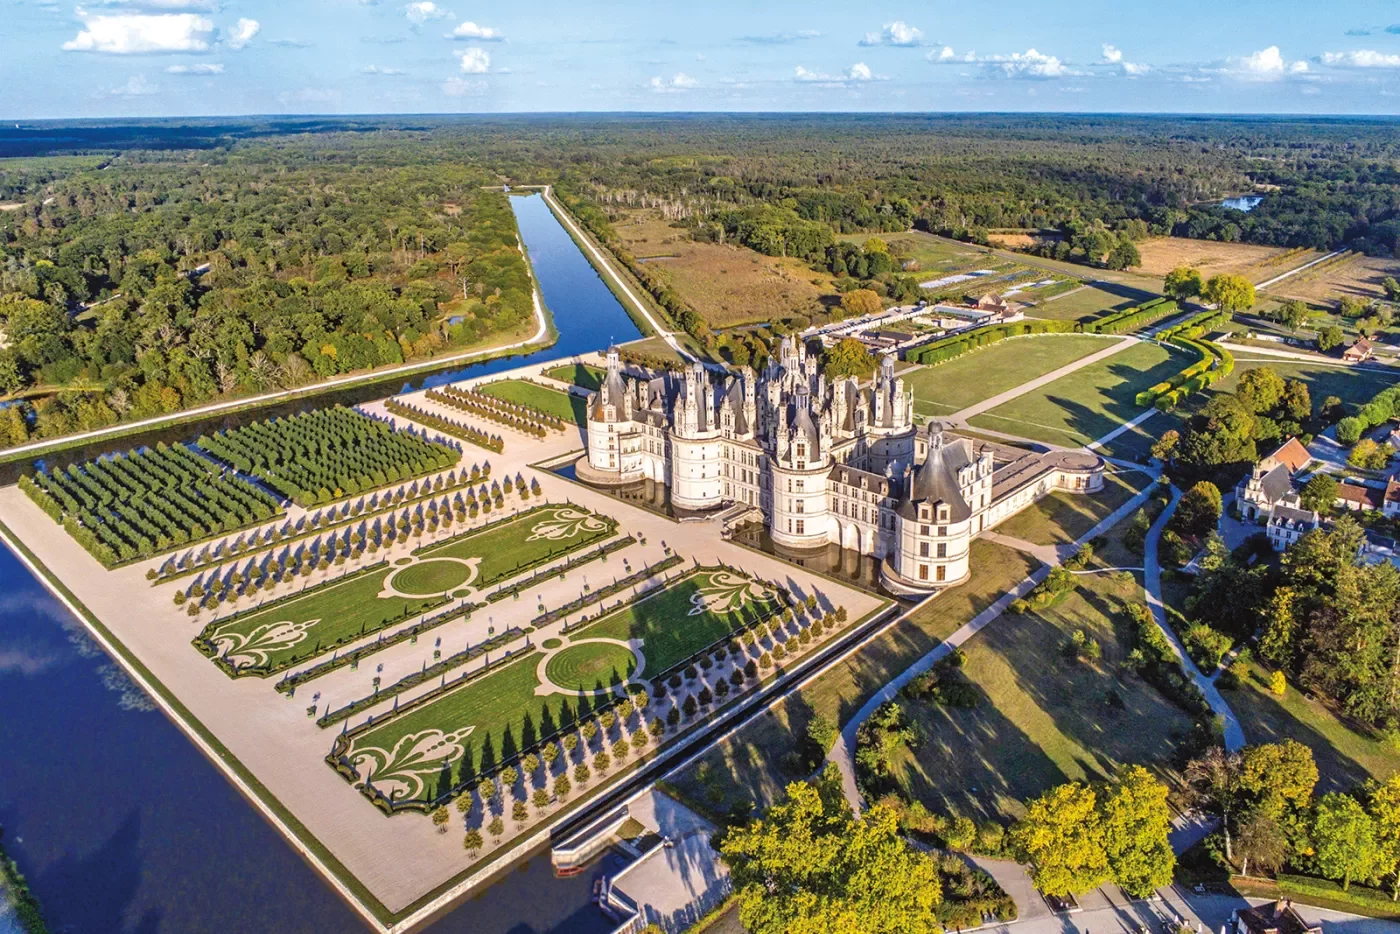 The North West Façade of the Chateau de Chambord